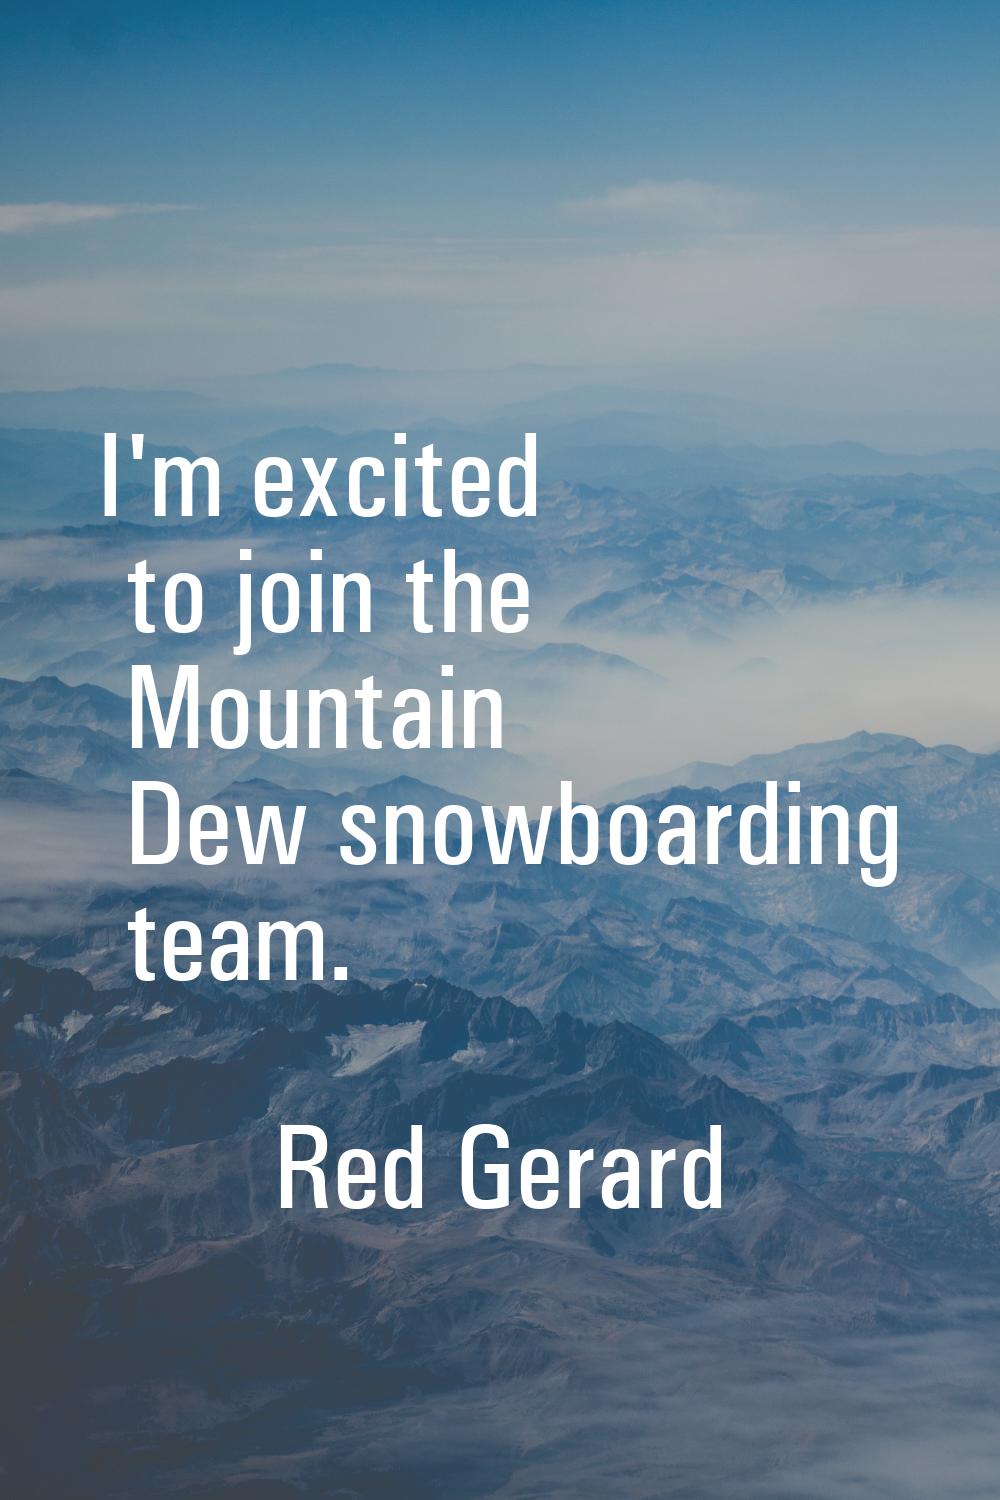 I'm excited to join the Mountain Dew snowboarding team.